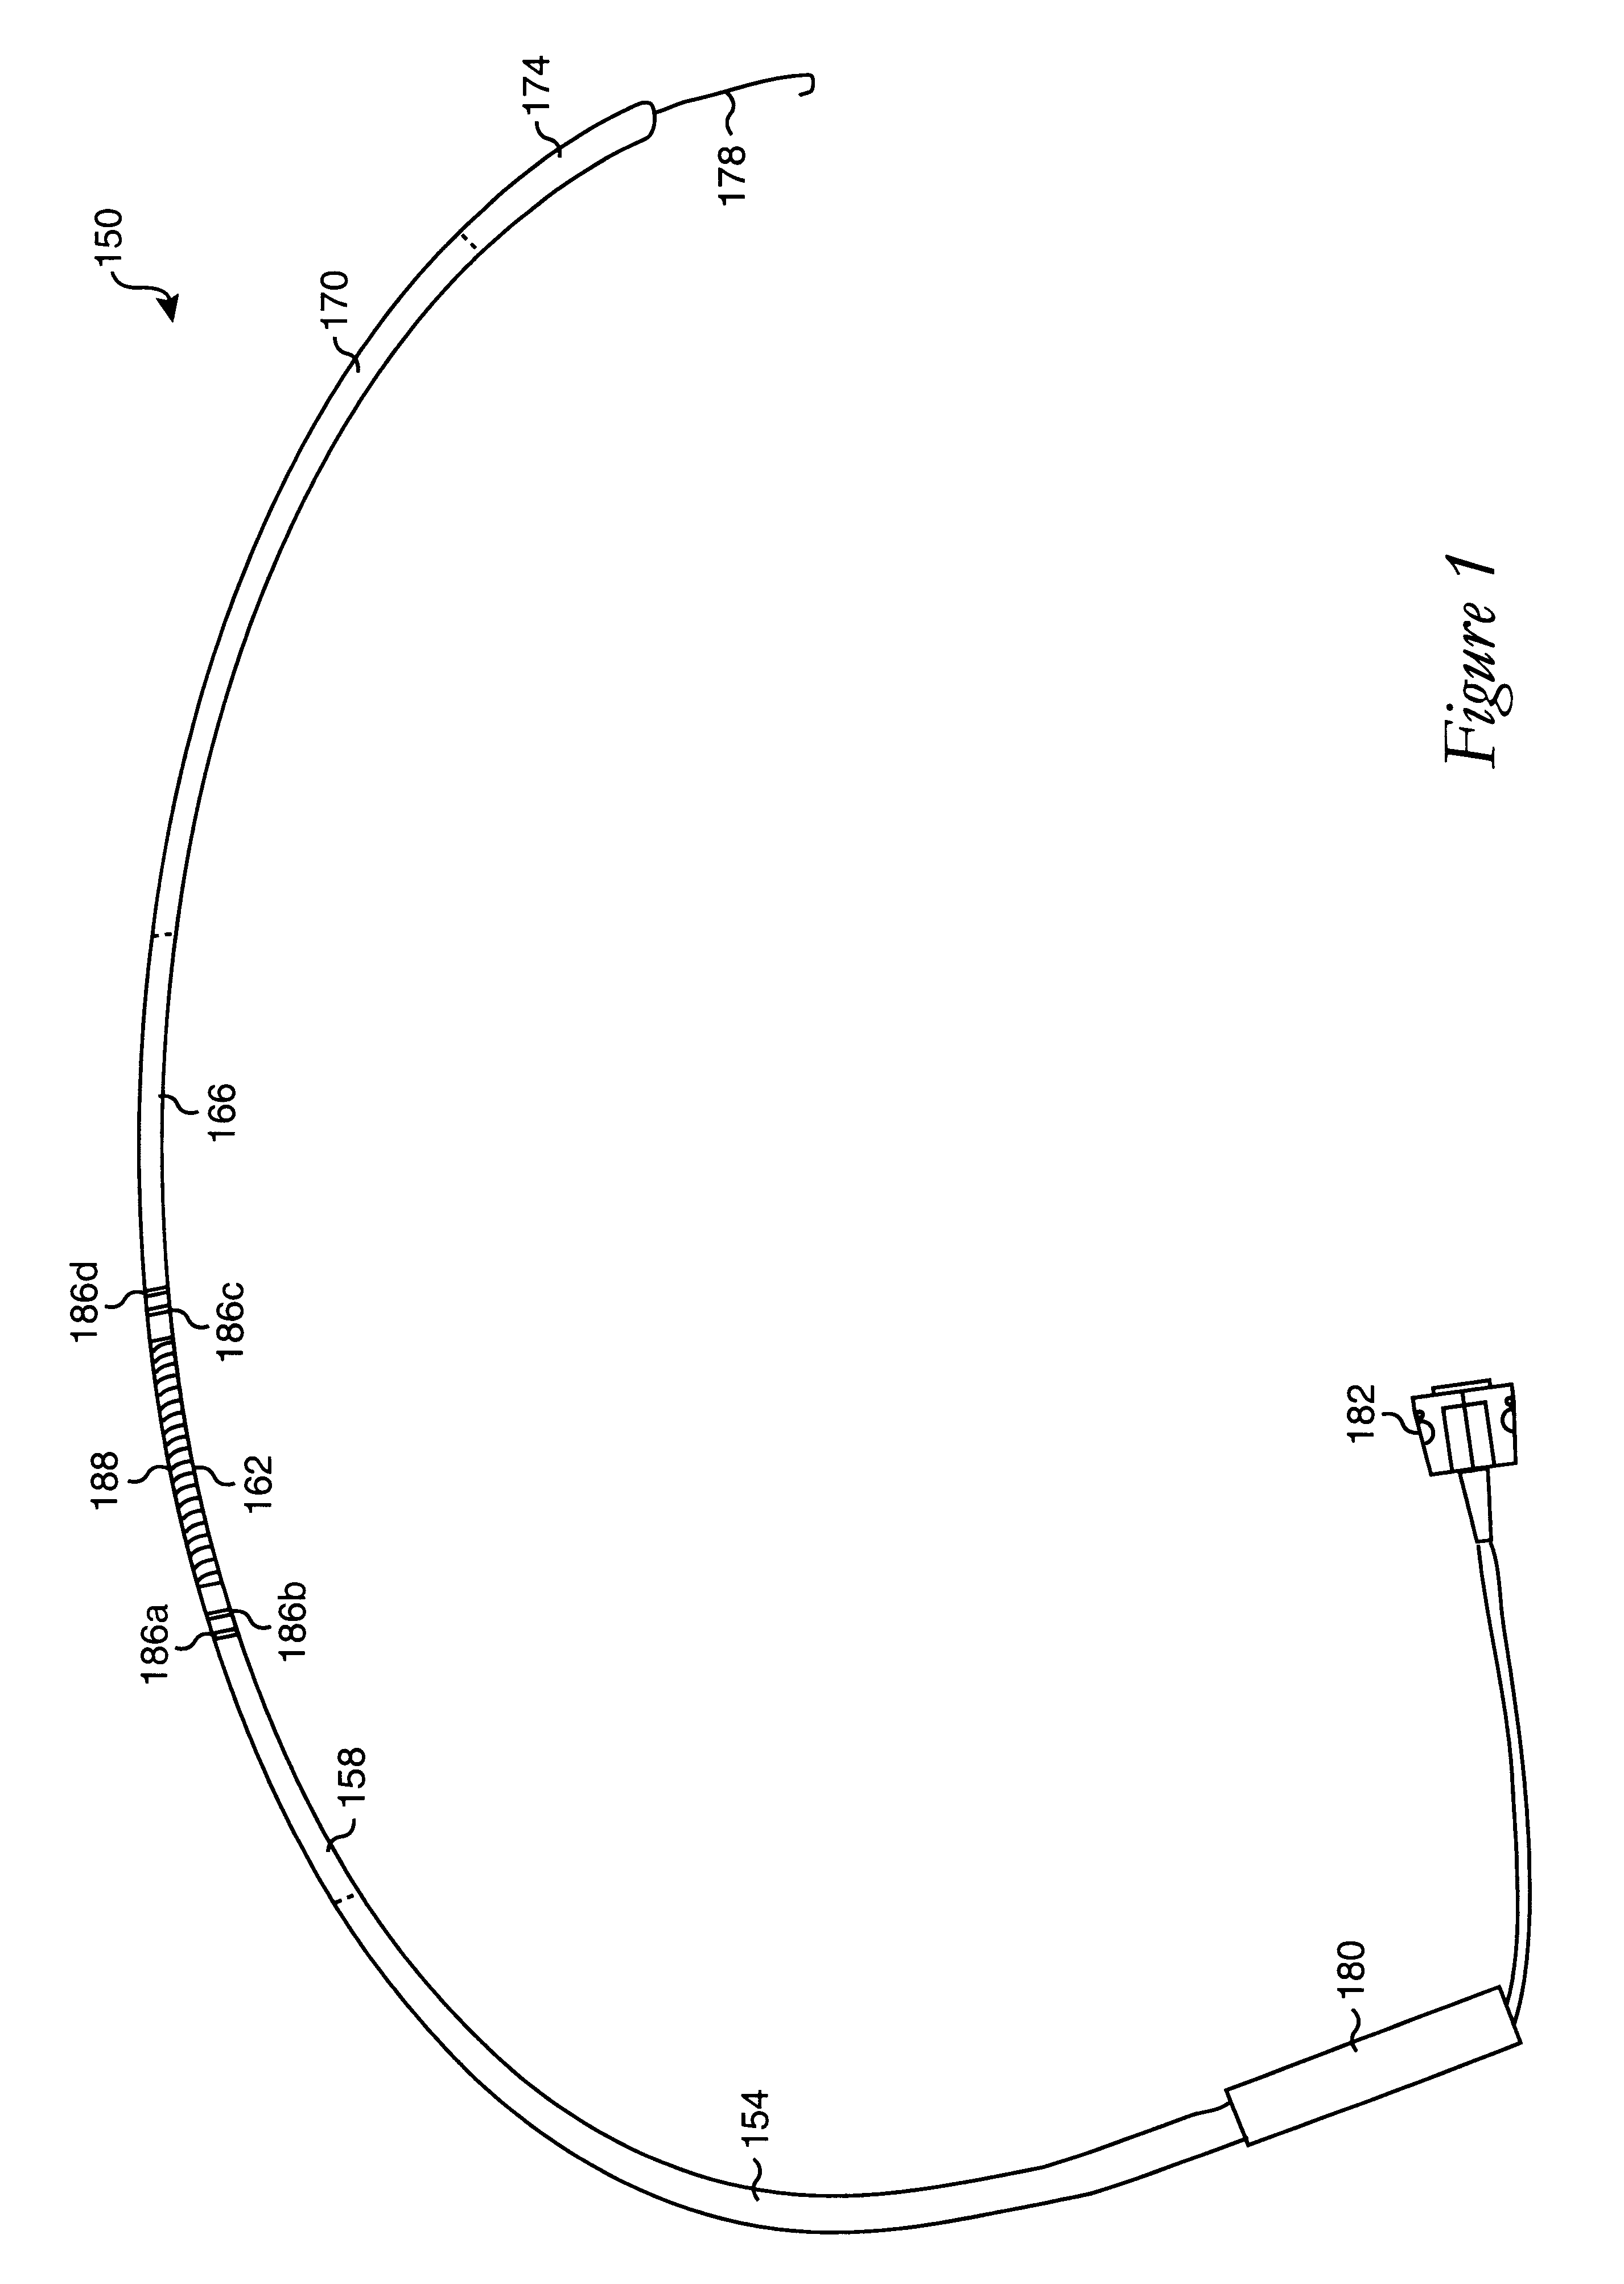 Microwave ablation catheter with loop configuration